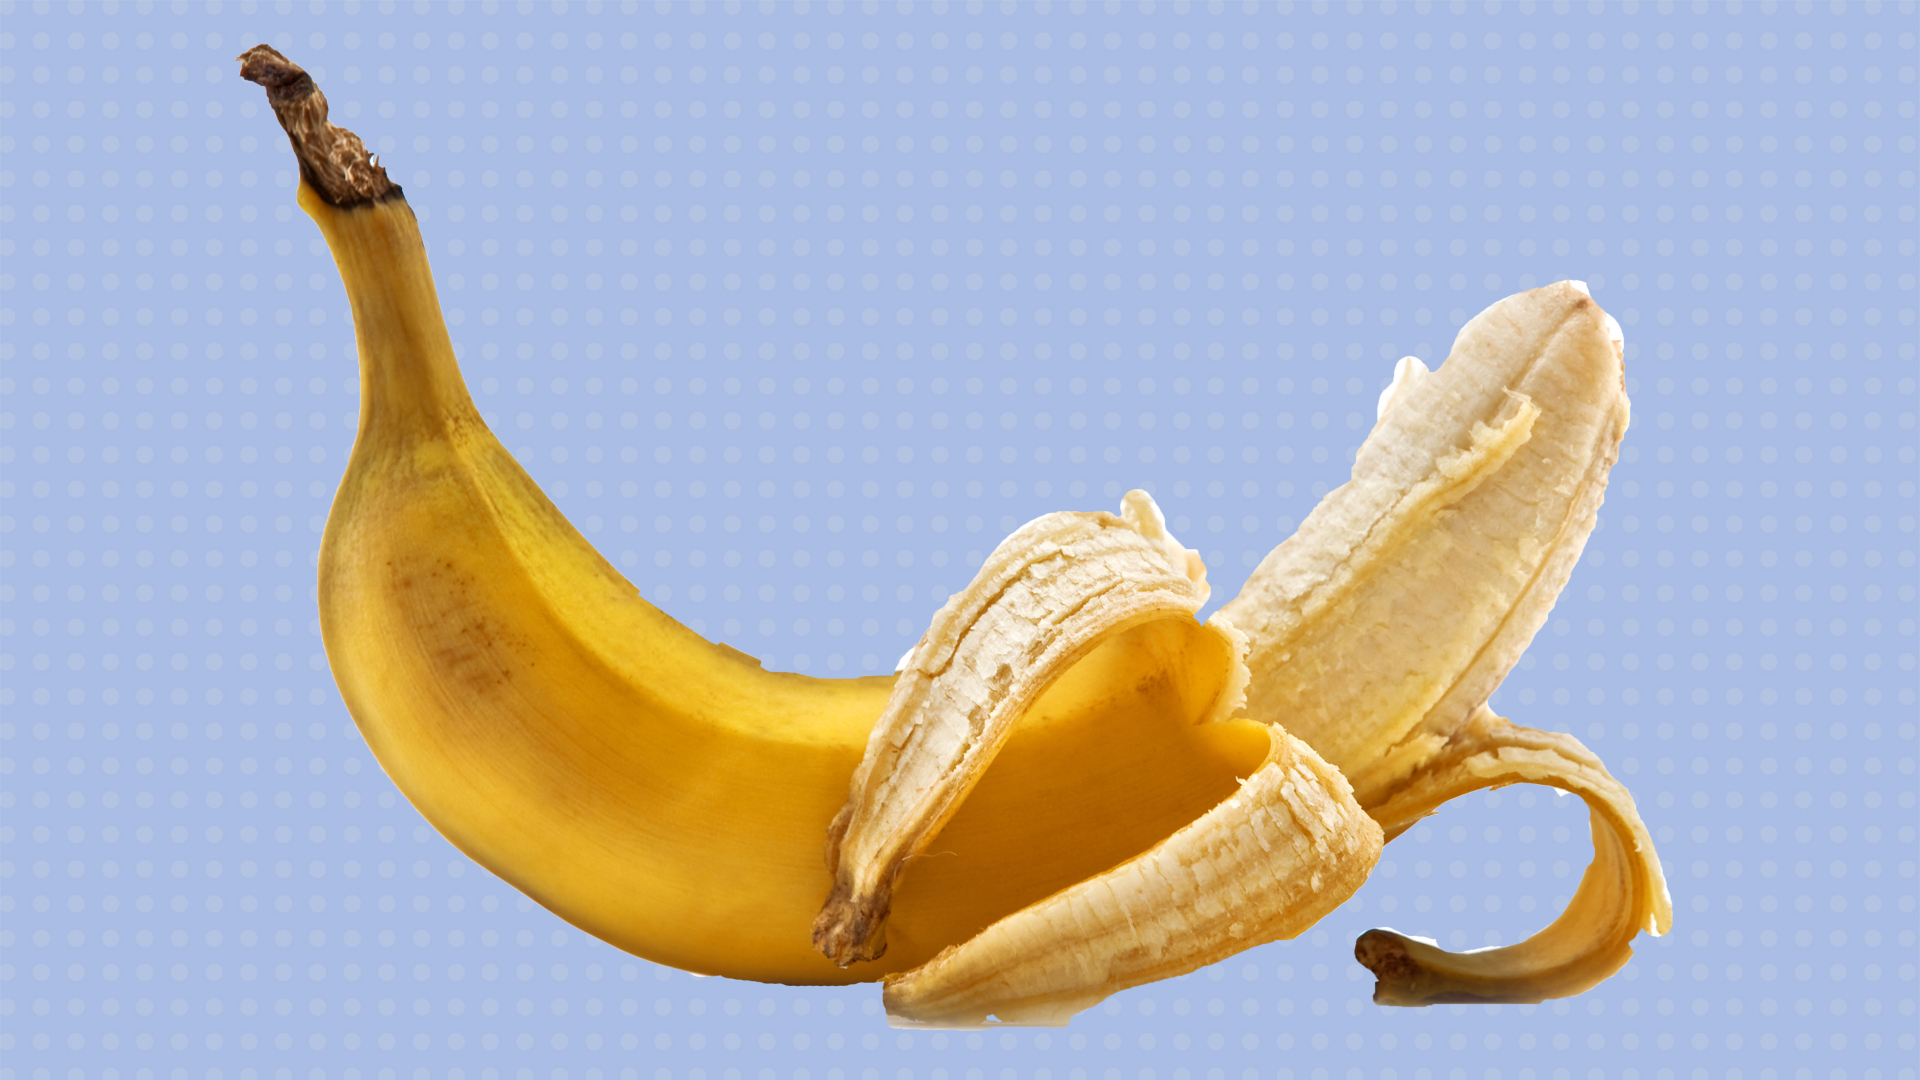 Those strings on bananas are called 'pholem bundles' - TODAY.com